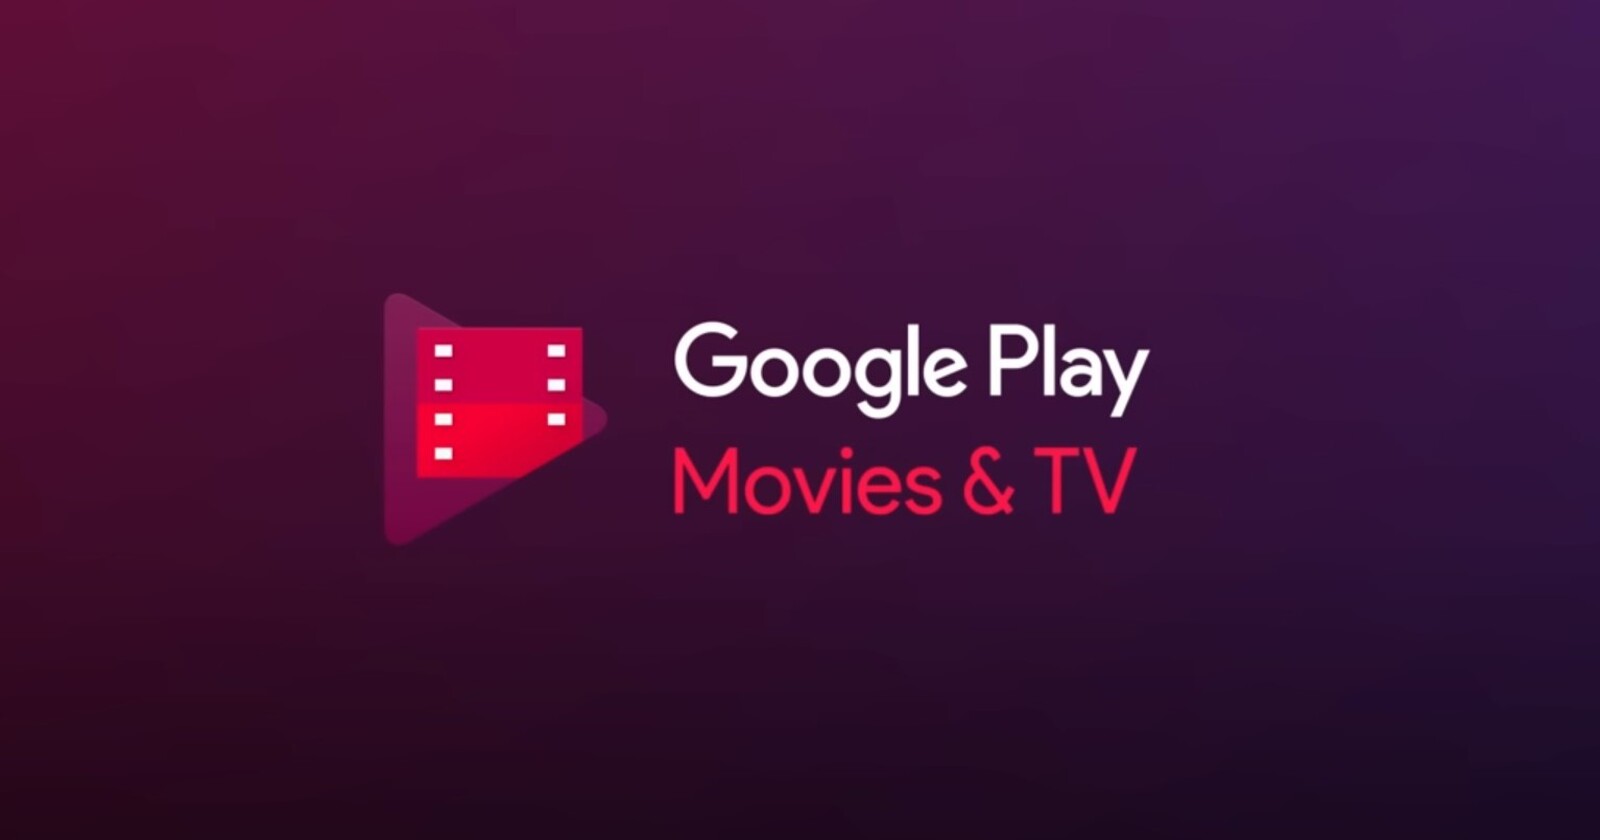 Google Play Movies & TV shutting down in January; apps already dead for some